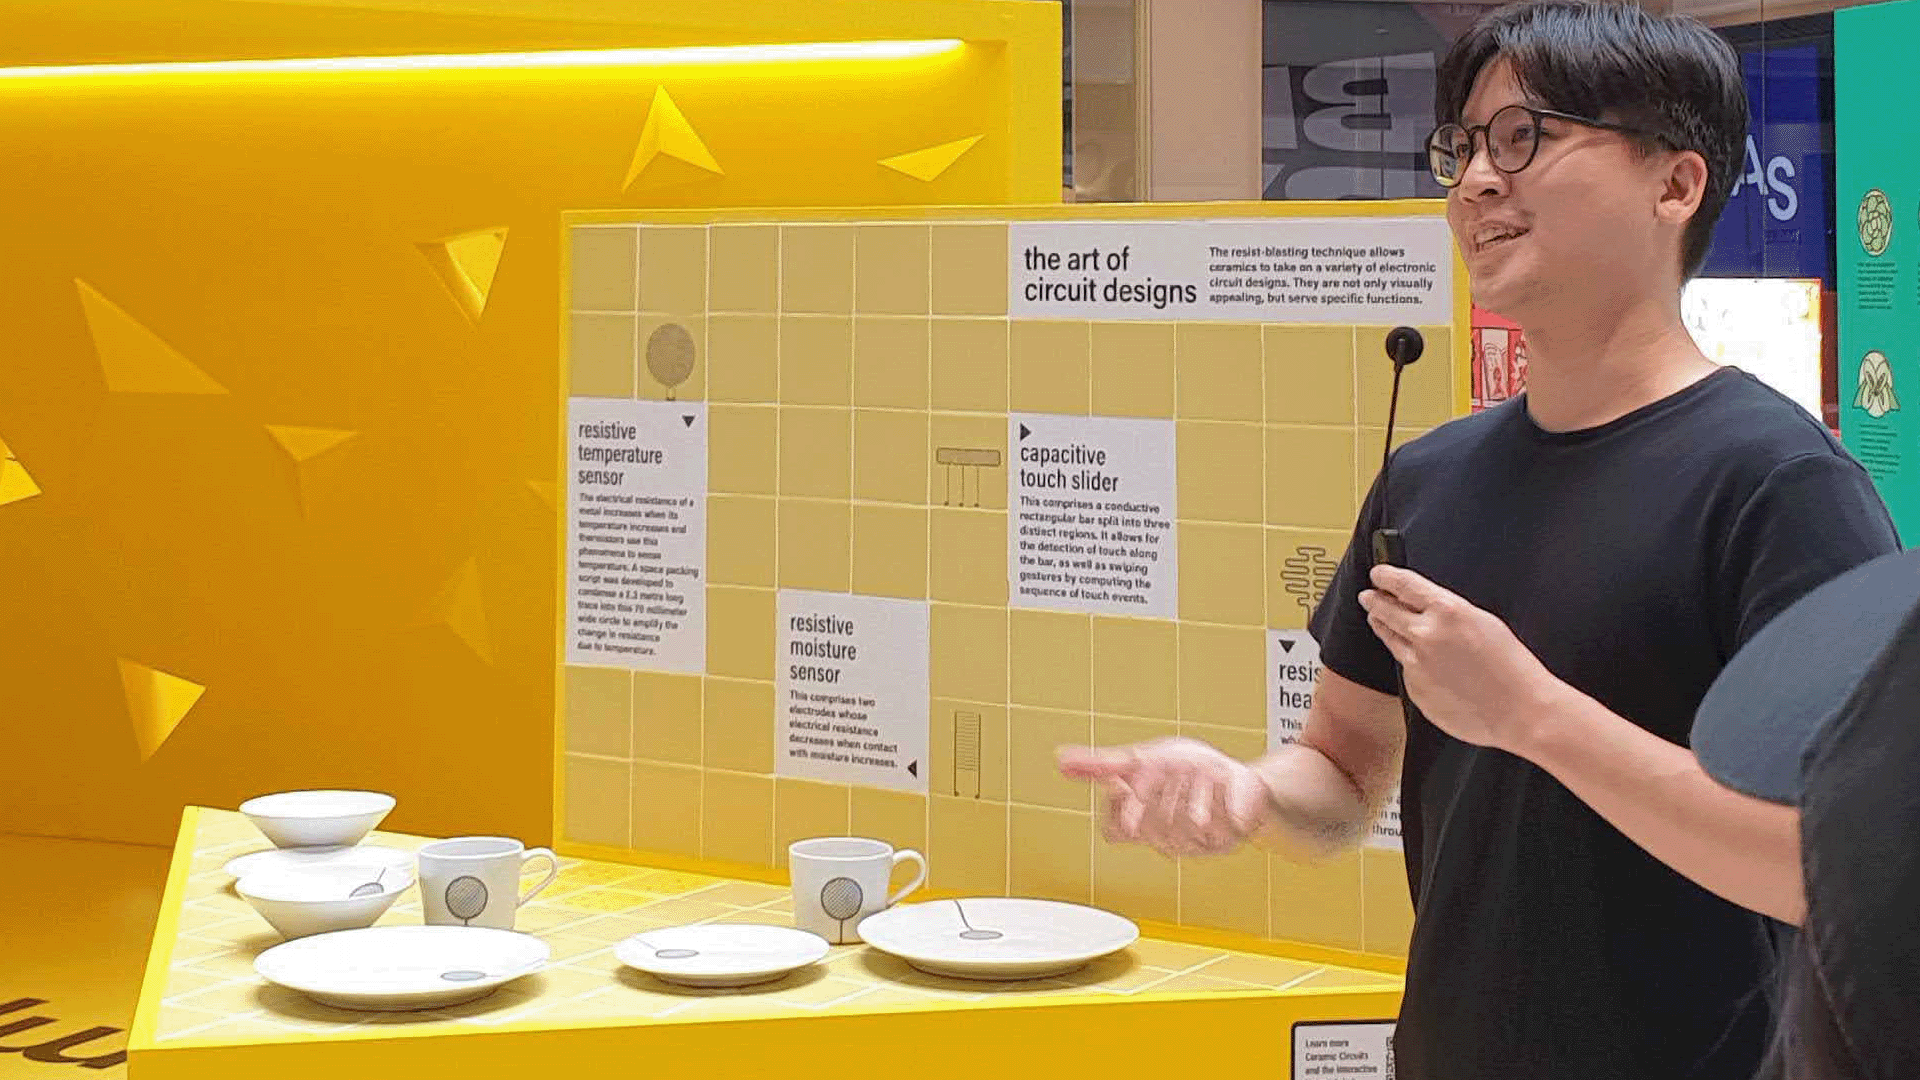 Asst Prof Clement Zheng introduces an exhibit on Ceramic Circuits at the National Design Centre in Singapore.